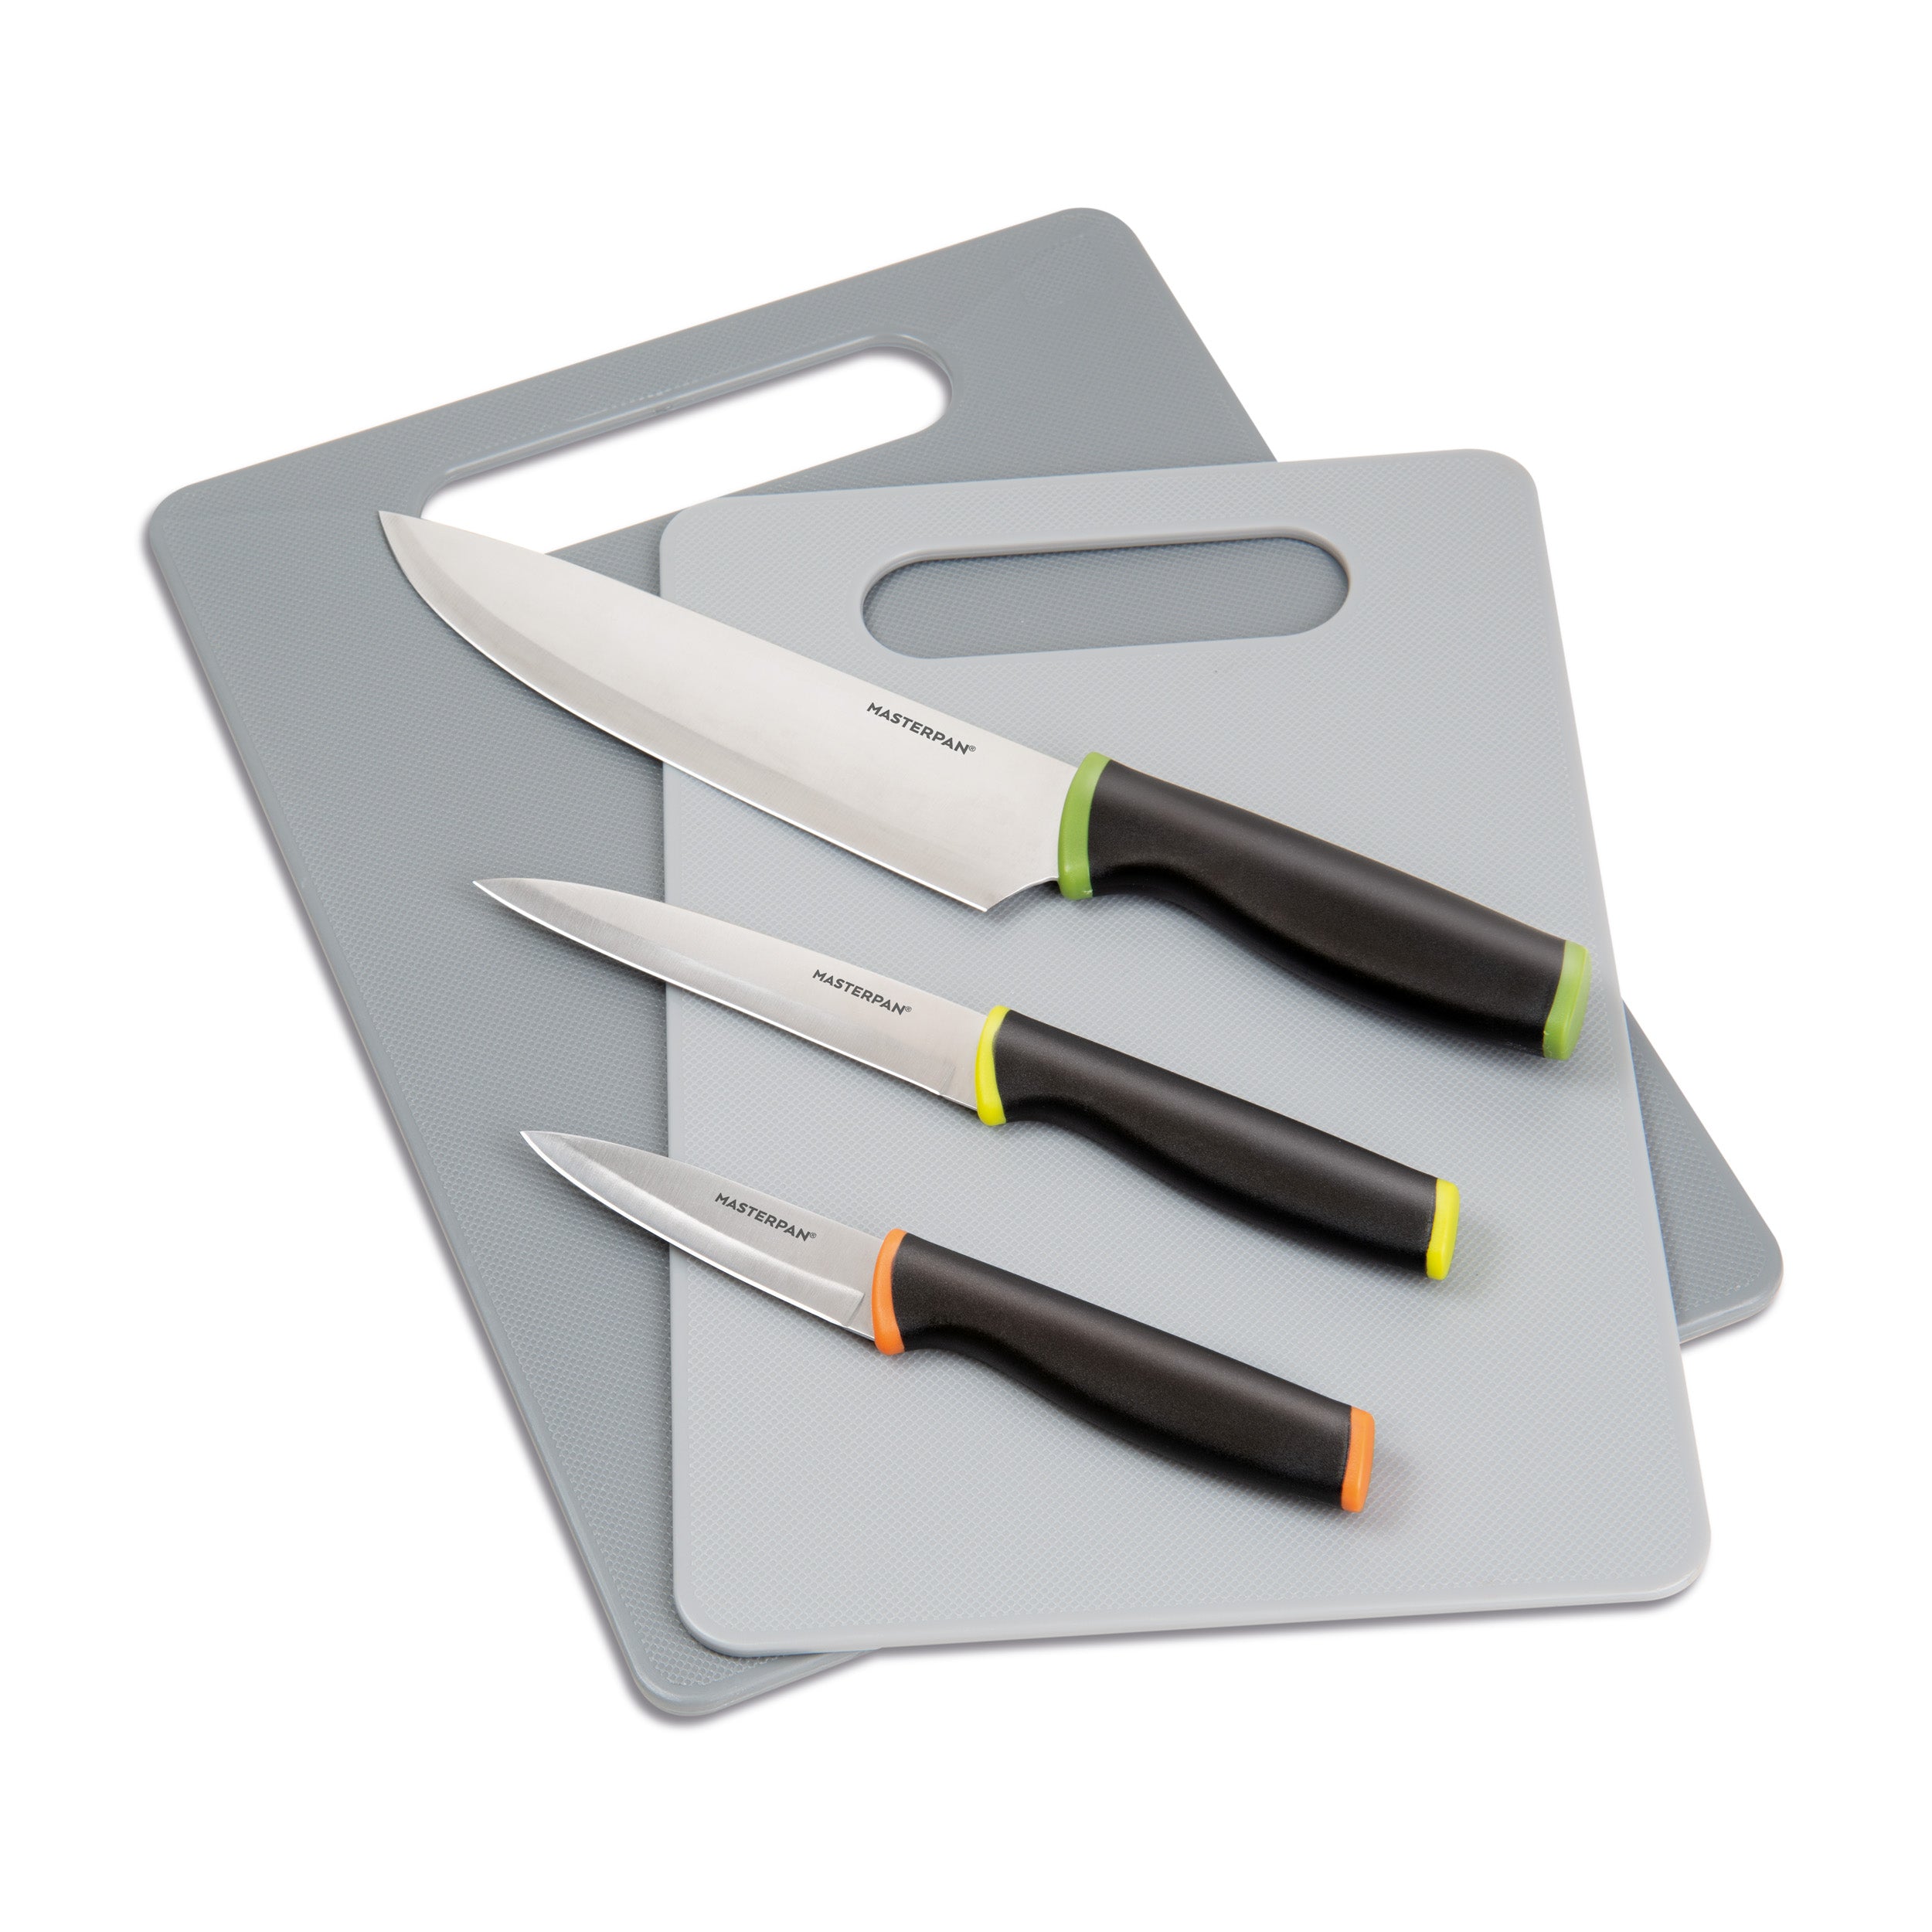 MasterPan Knife Set With Plastic Cutting Boards & Protective Blade Covers, Stainless Steel Blade And Non-Slip Handle - multi